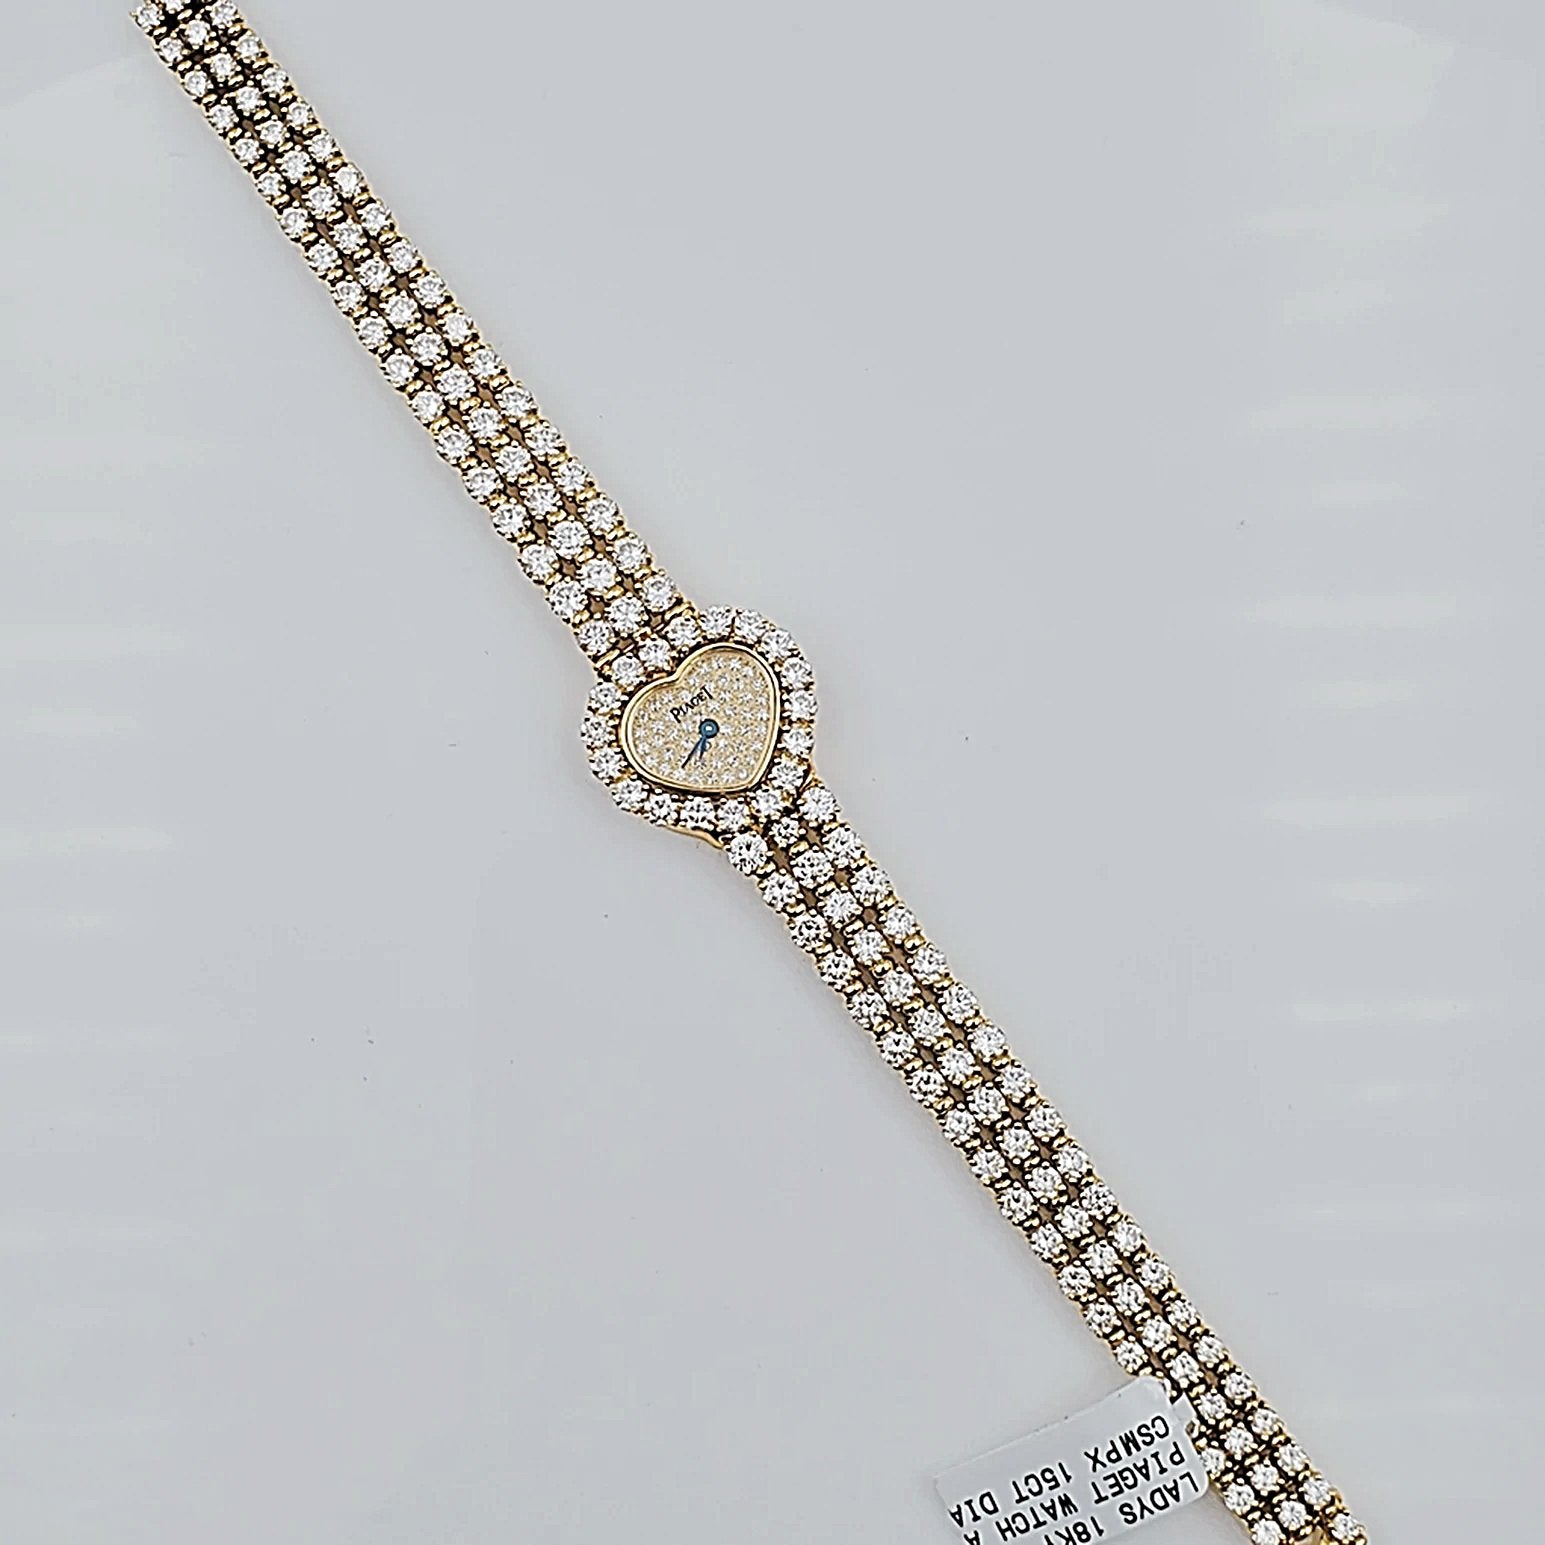 Ladies Piaget Solid 18K Yellow Gold All Diamond 15CT VS1 F Color Bracelet Band Watch with Diamond Dial and Diamond Bezel. (Pre-Owned)